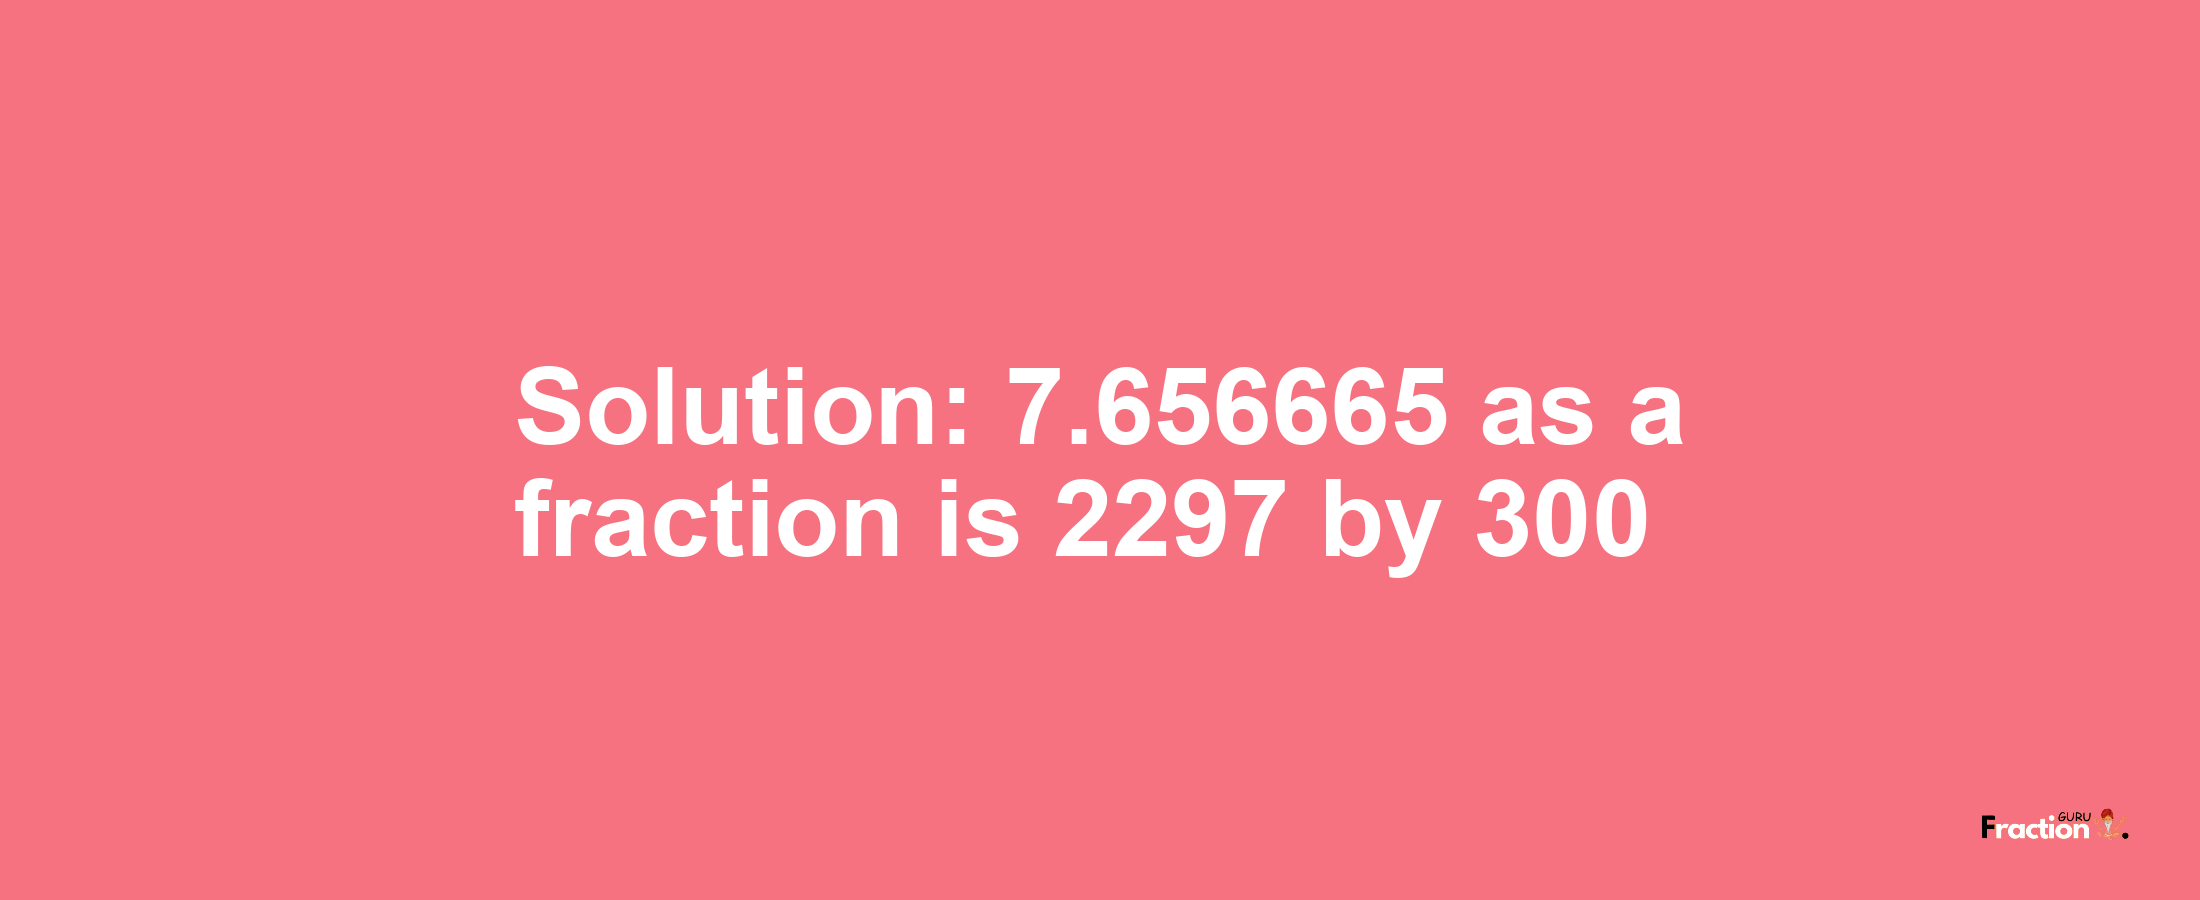 Solution:7.656665 as a fraction is 2297/300